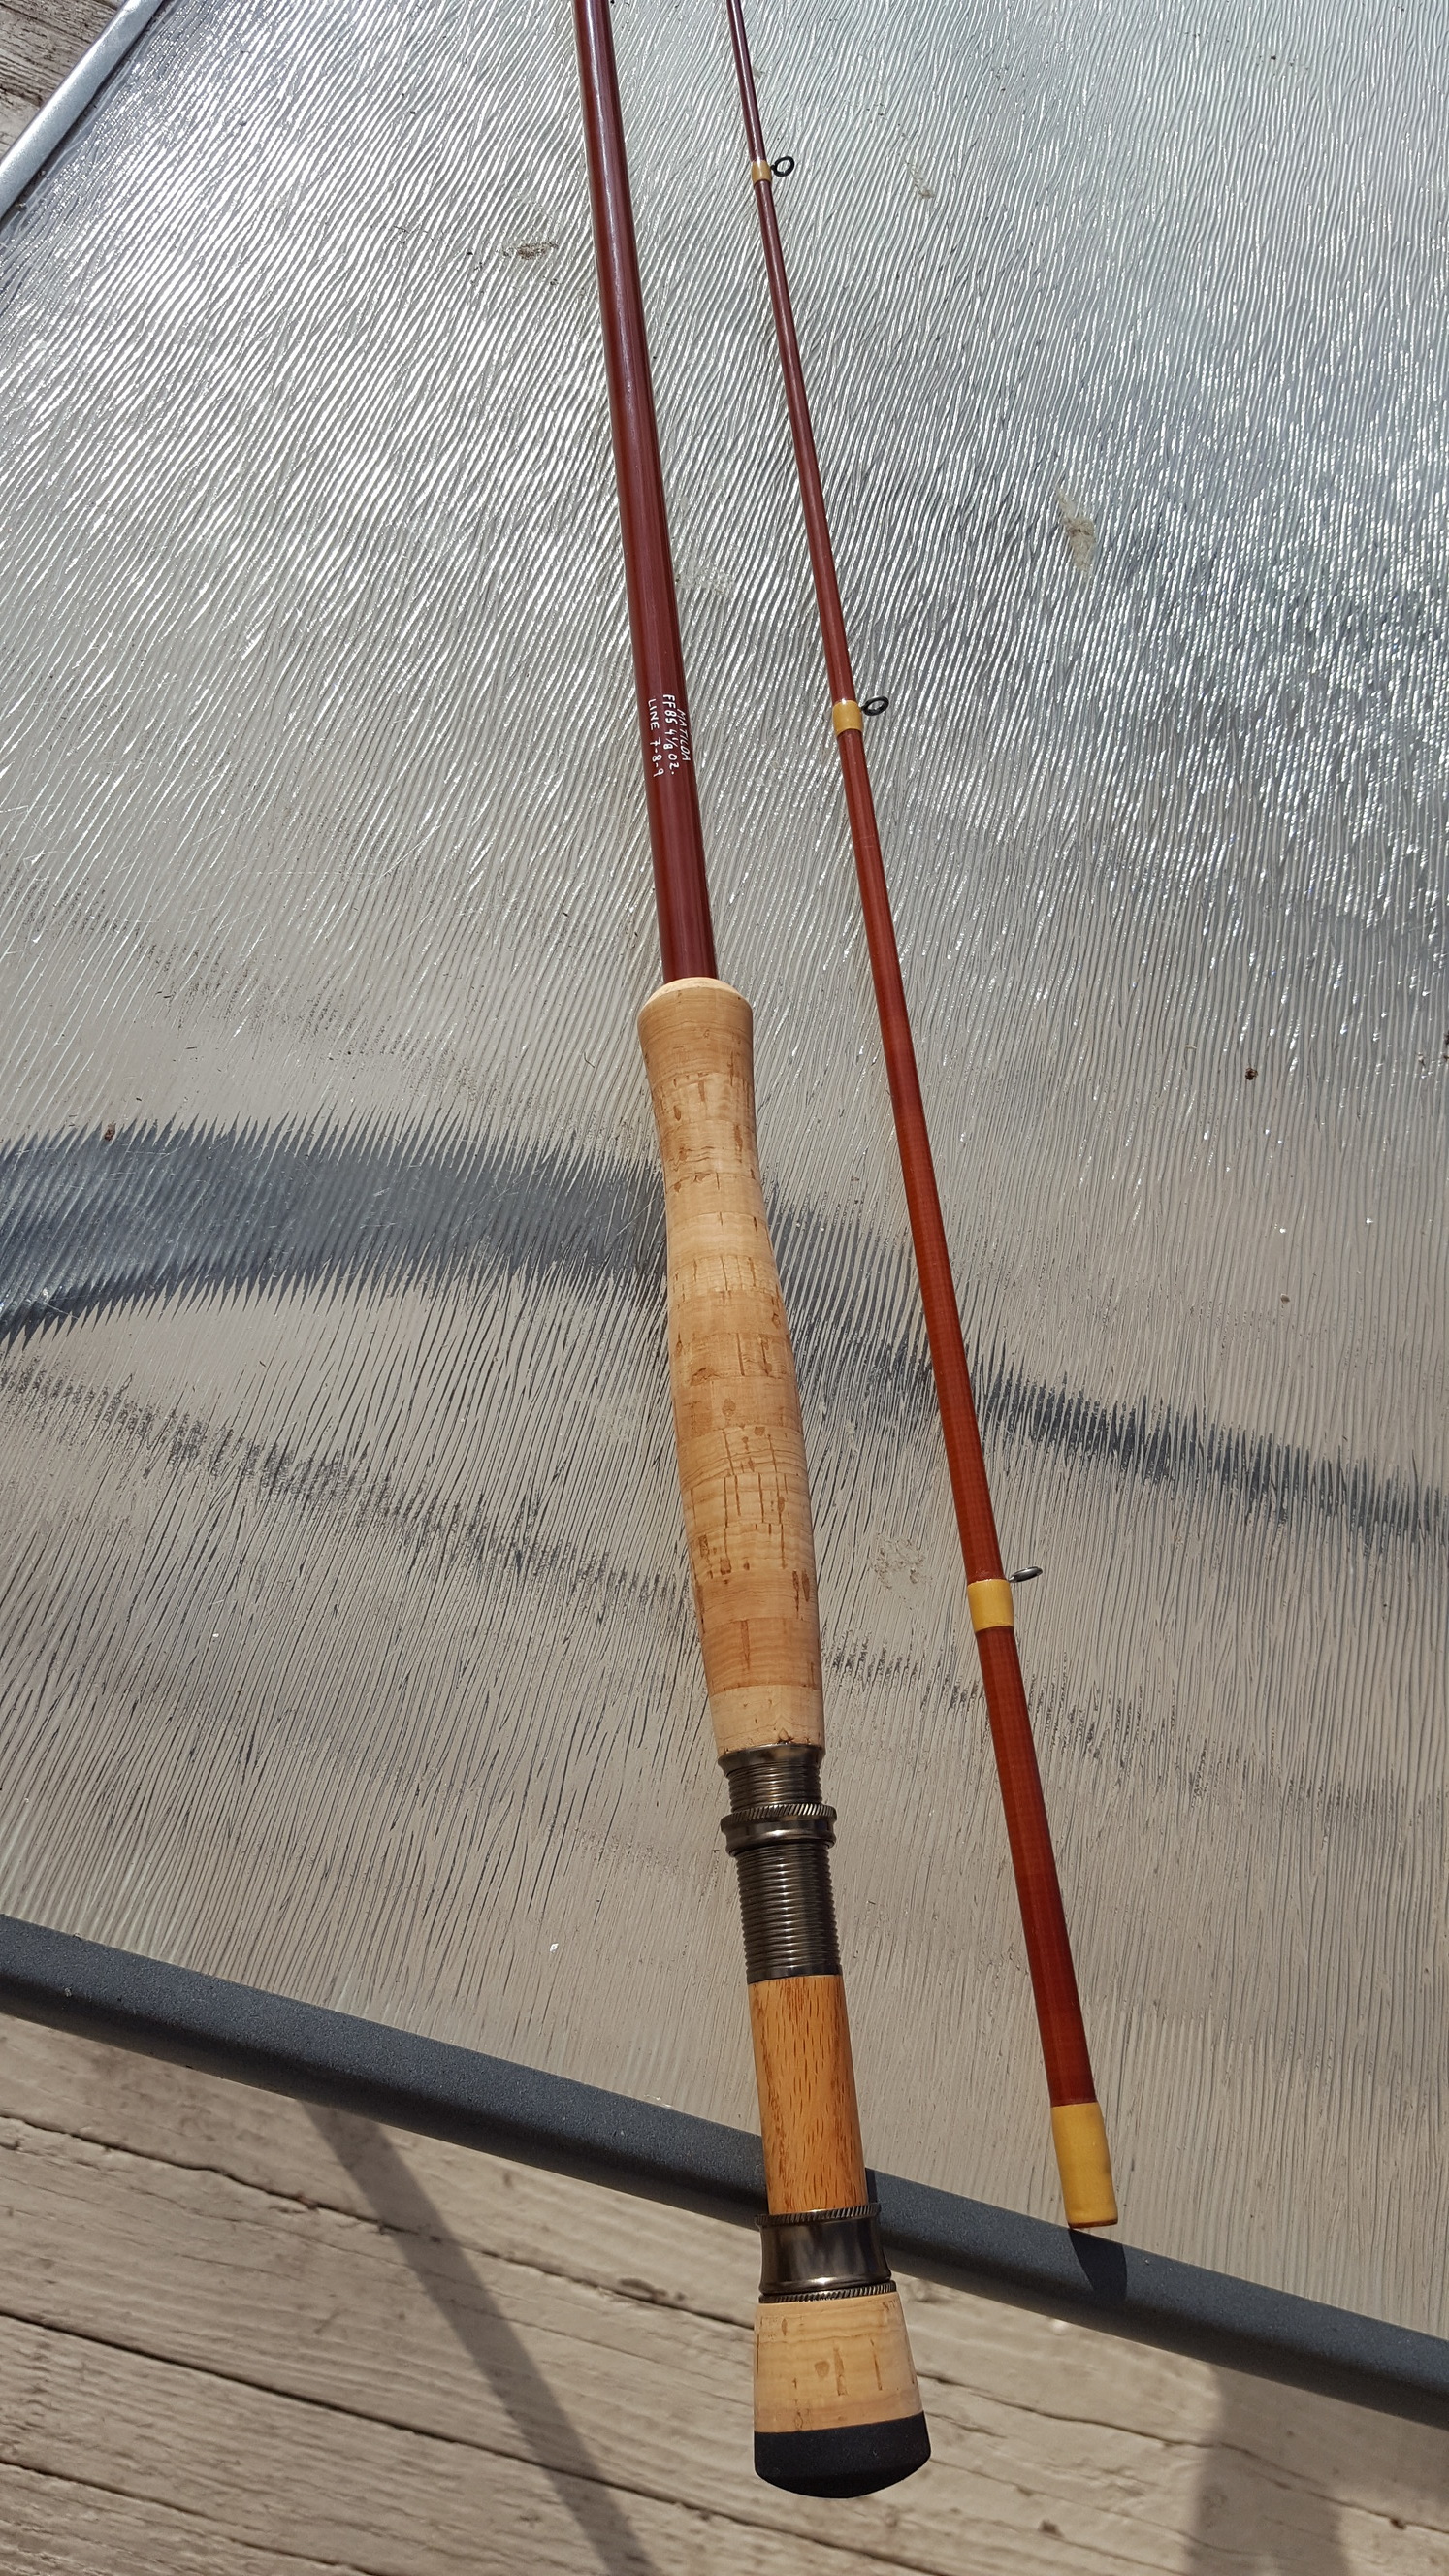 Fenwick FF85 7-8-9 rebuild project, Rod Building and Tackle Tinkering